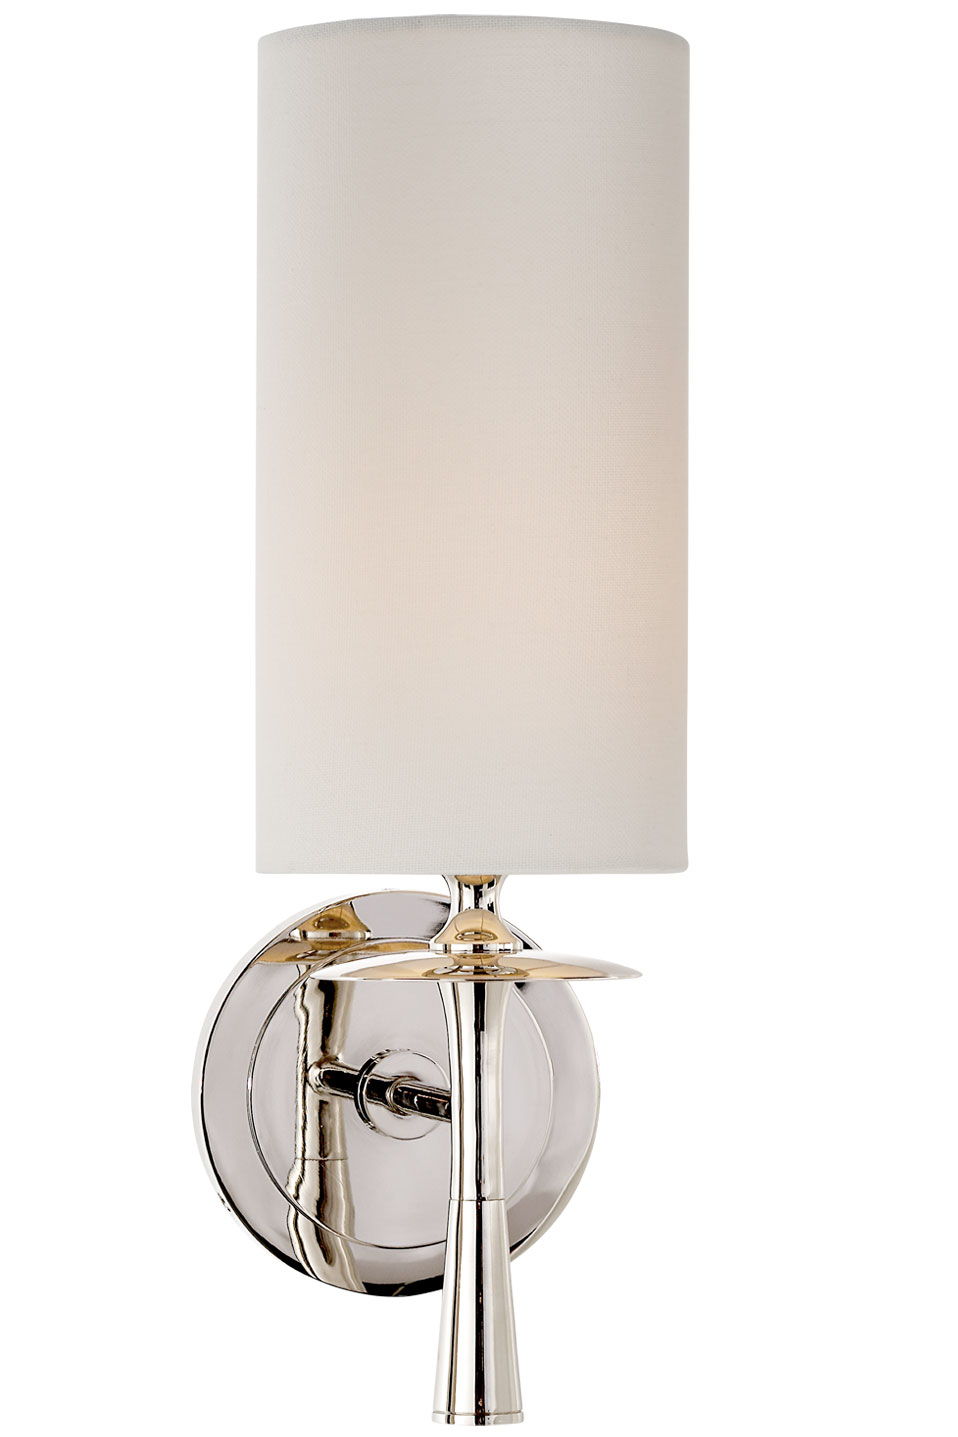 Drunmore classic silver and white linen sconce. Visual Comfort&Co.. 